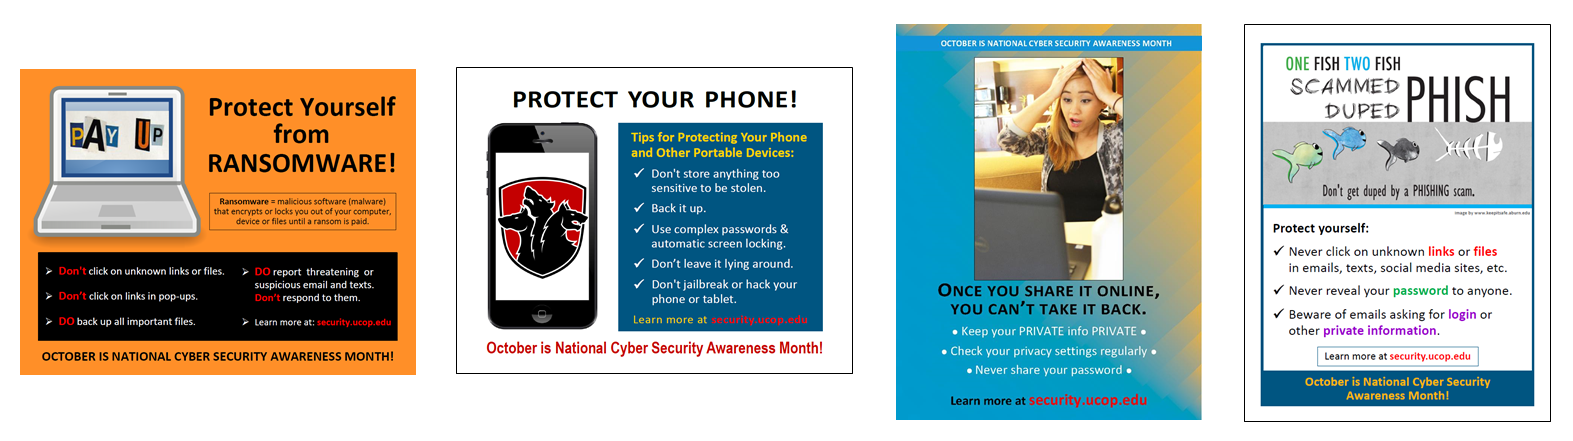 Cybersecurity posters: Protect your phone, Protect yourself from ransomware, Keep your private info private, Don't get duped by a phishing scam. 